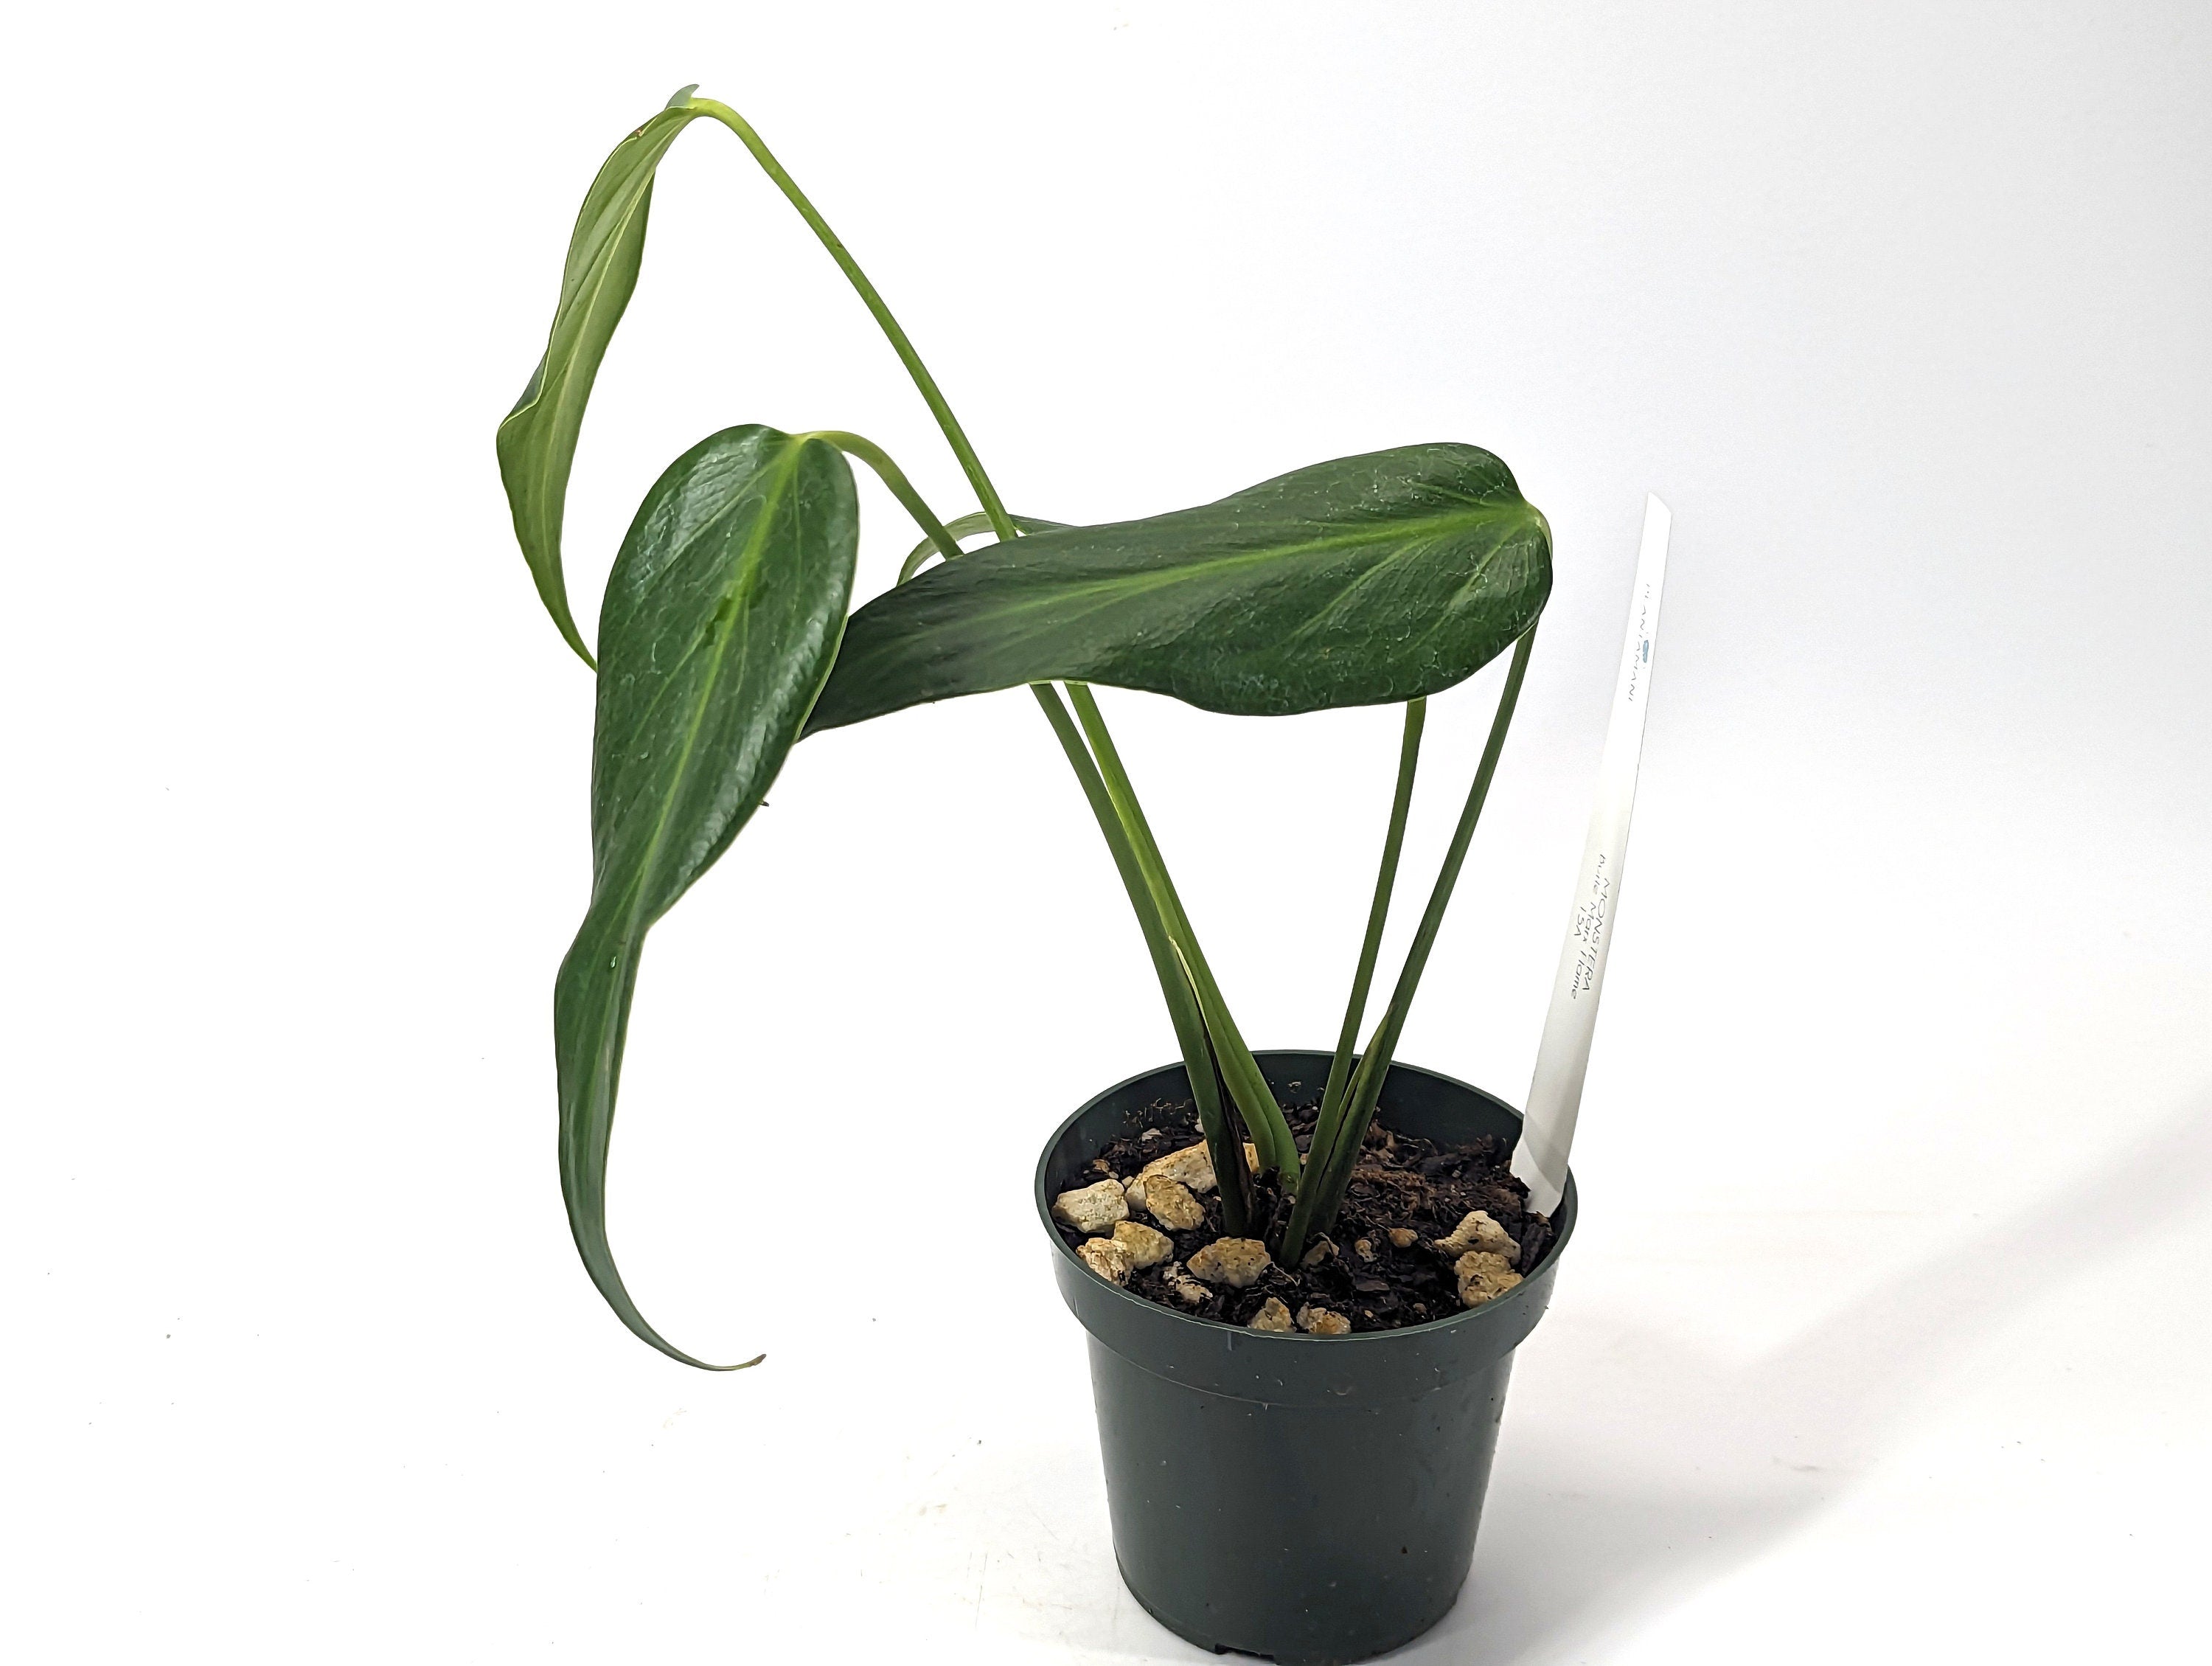 Monstera Burle Marx Flame Exact Plant - Rooted Live Plant - 4 inch pot